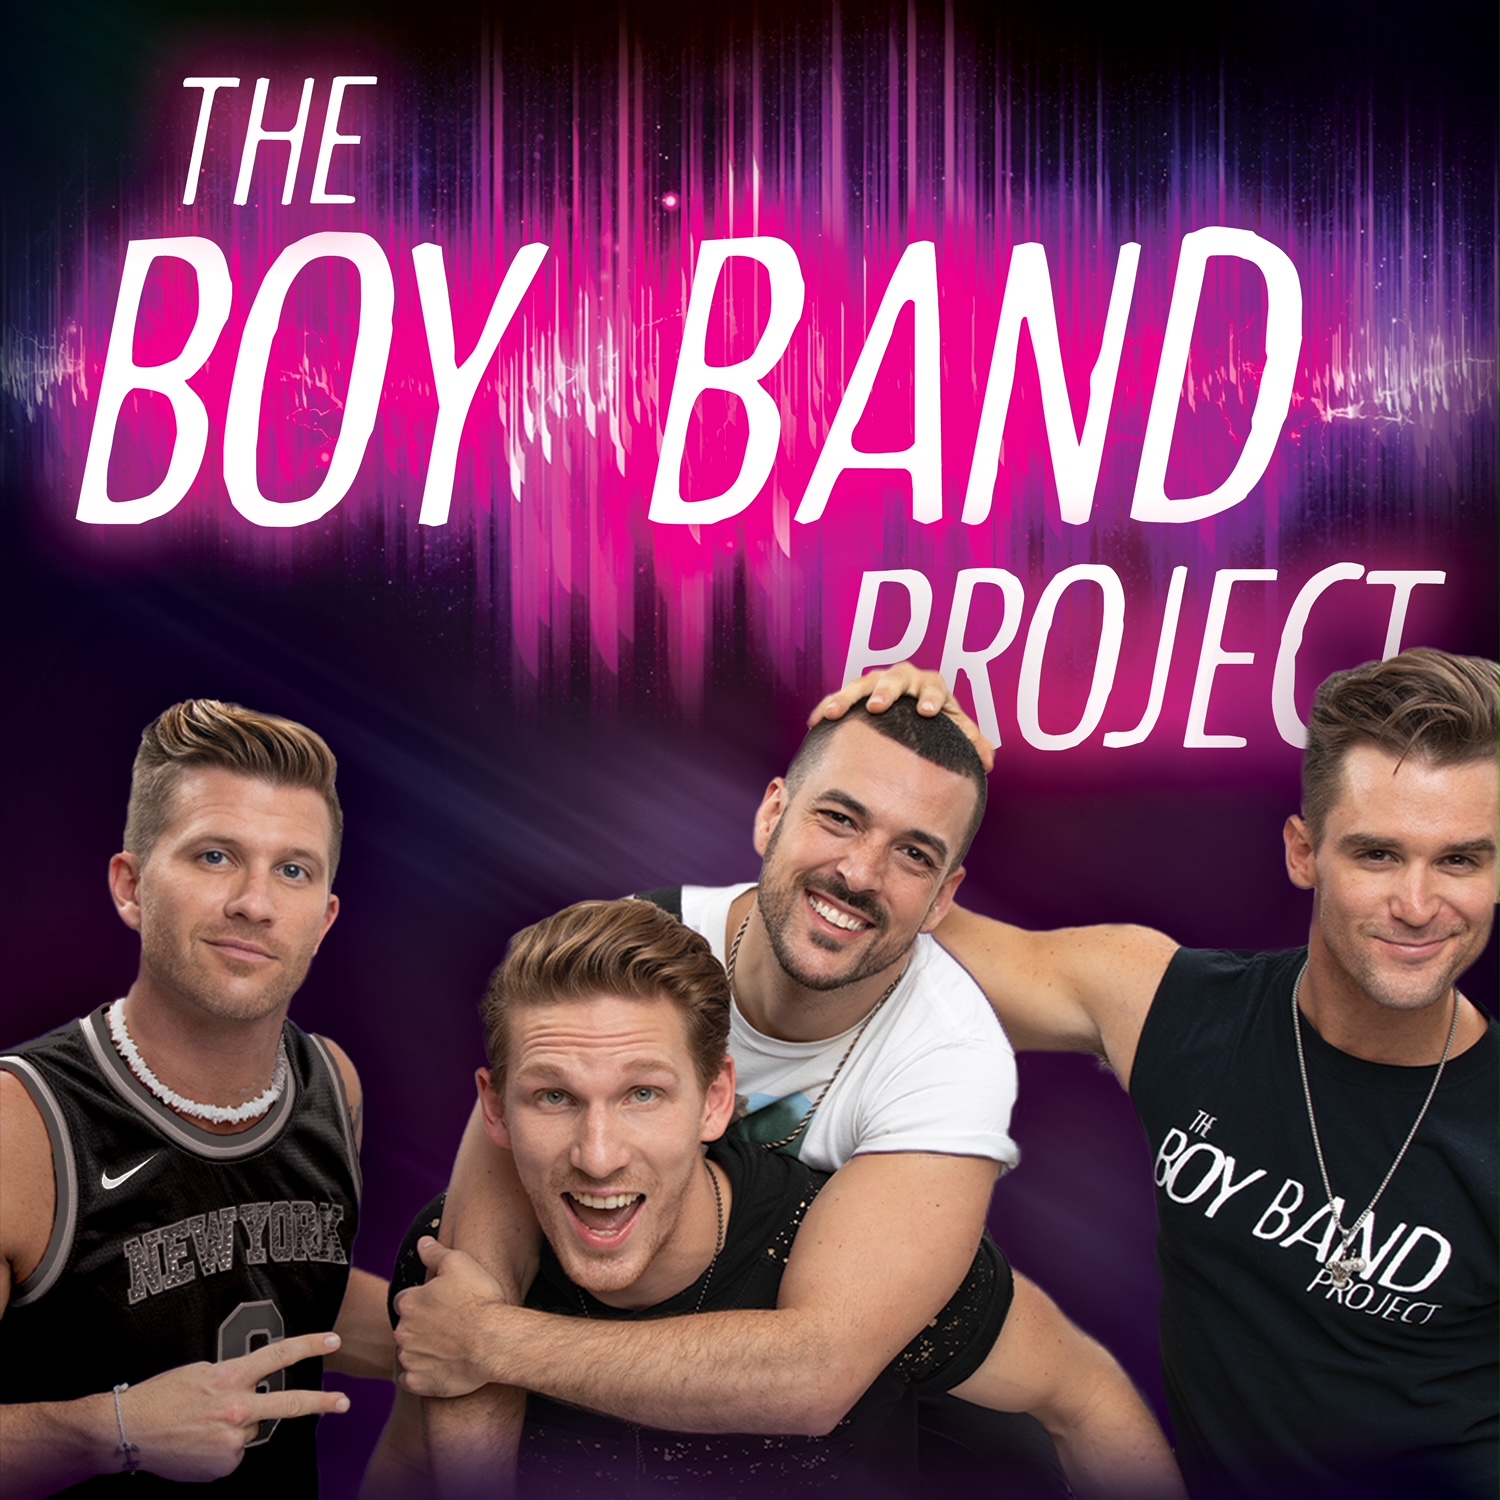 Boy Band Project